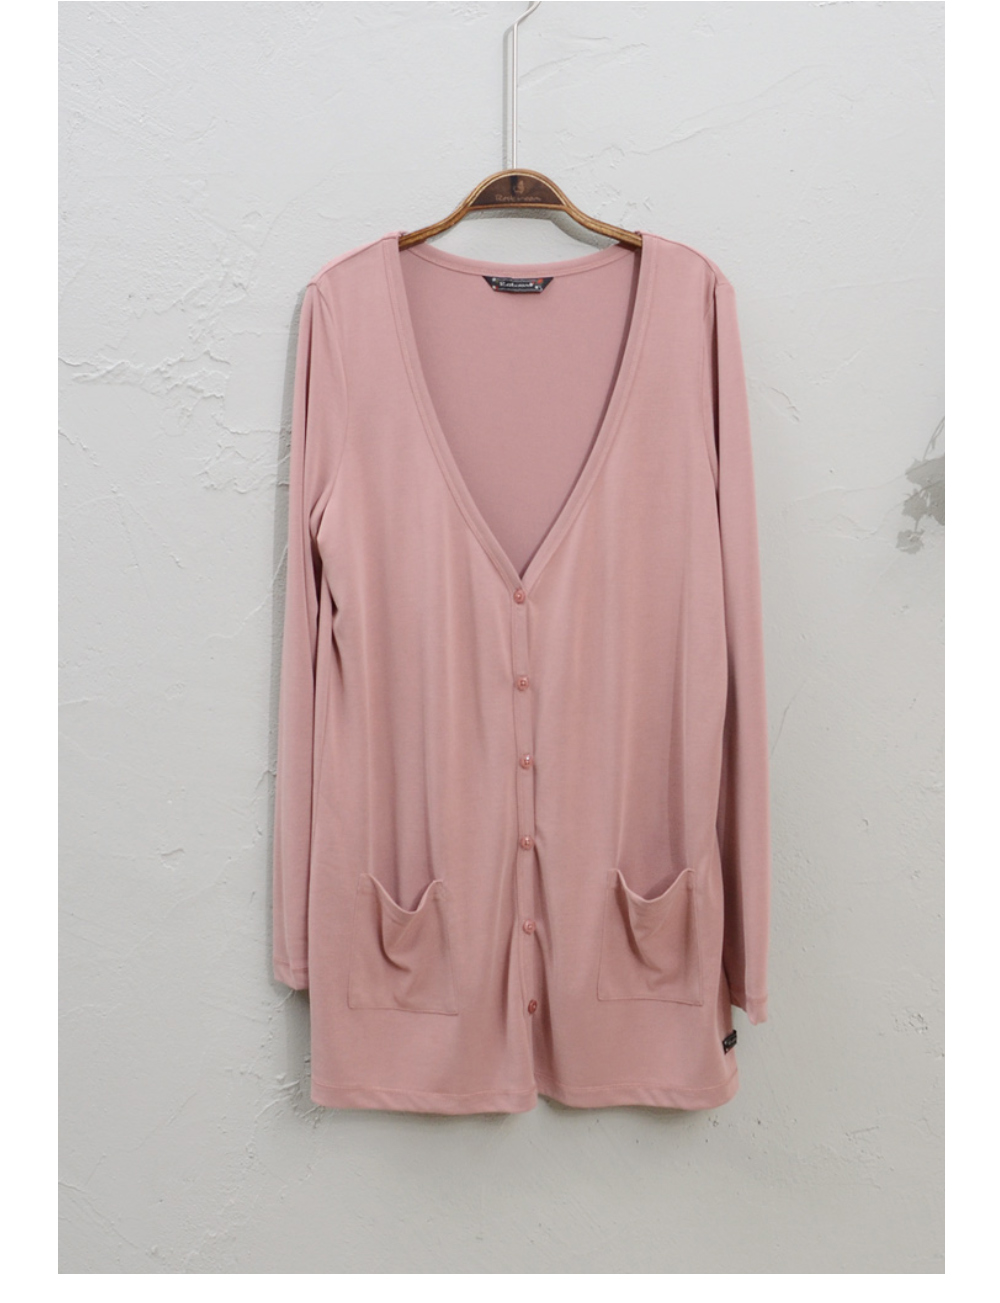 cardigan baby pink color image-S1L39